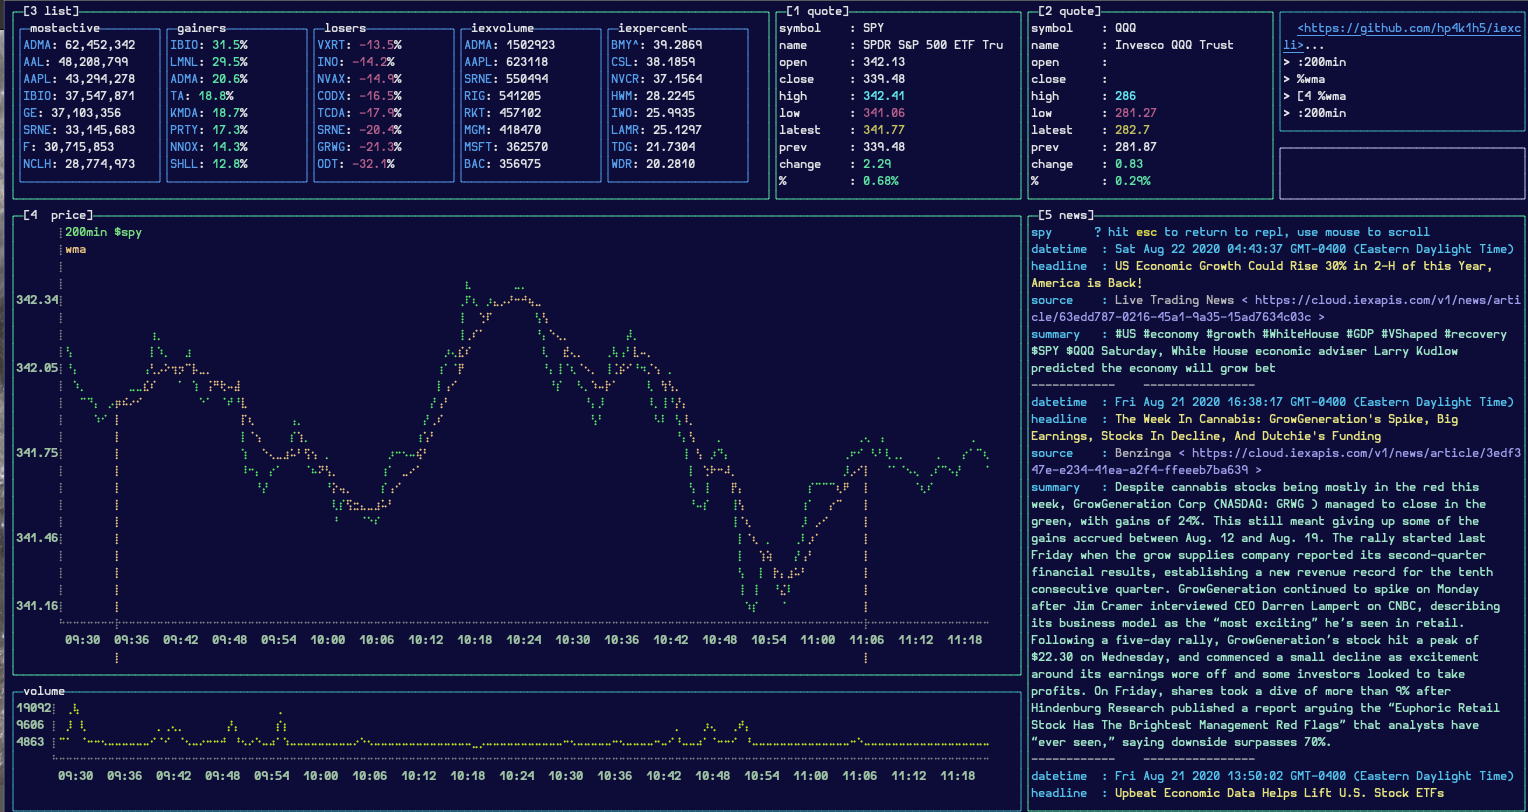 screenshot of a terminal window displaying a stock chart, active
gainers/losers, and stock related news